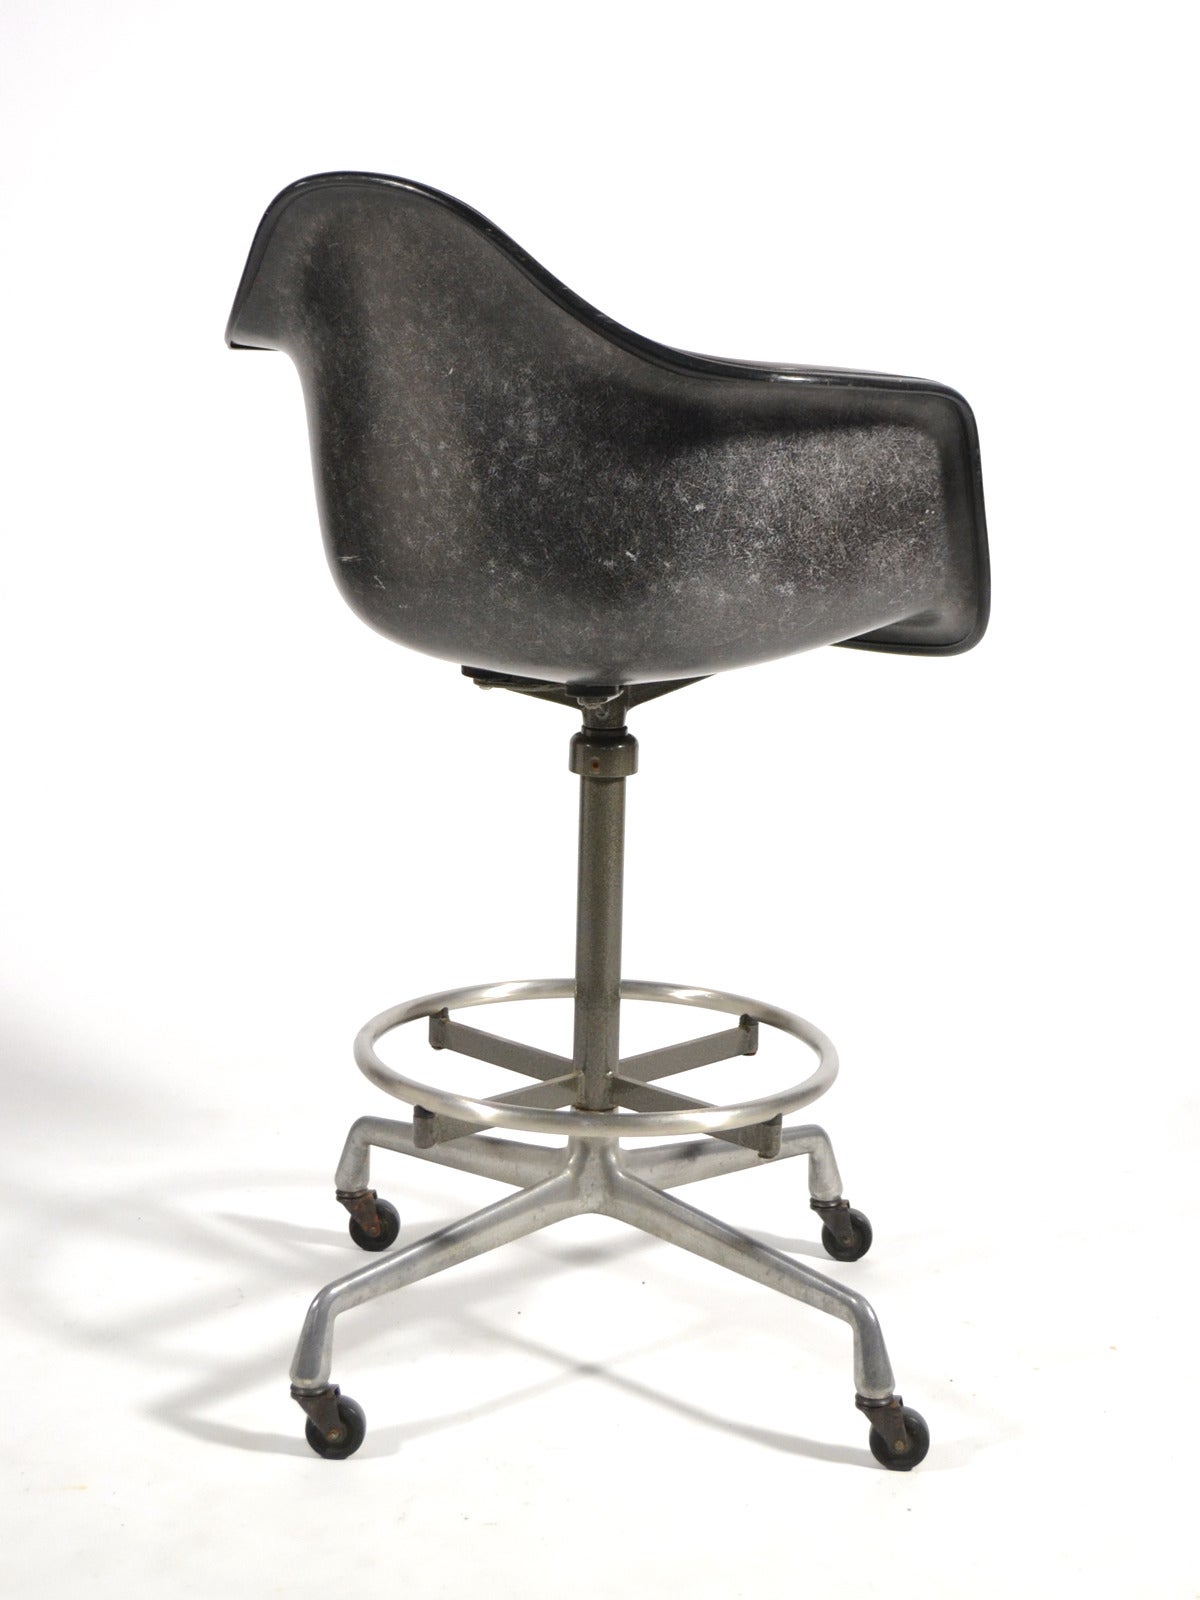 Fiberglass Charles and Ray Eames Drafting Height Armchair by Herman Miller